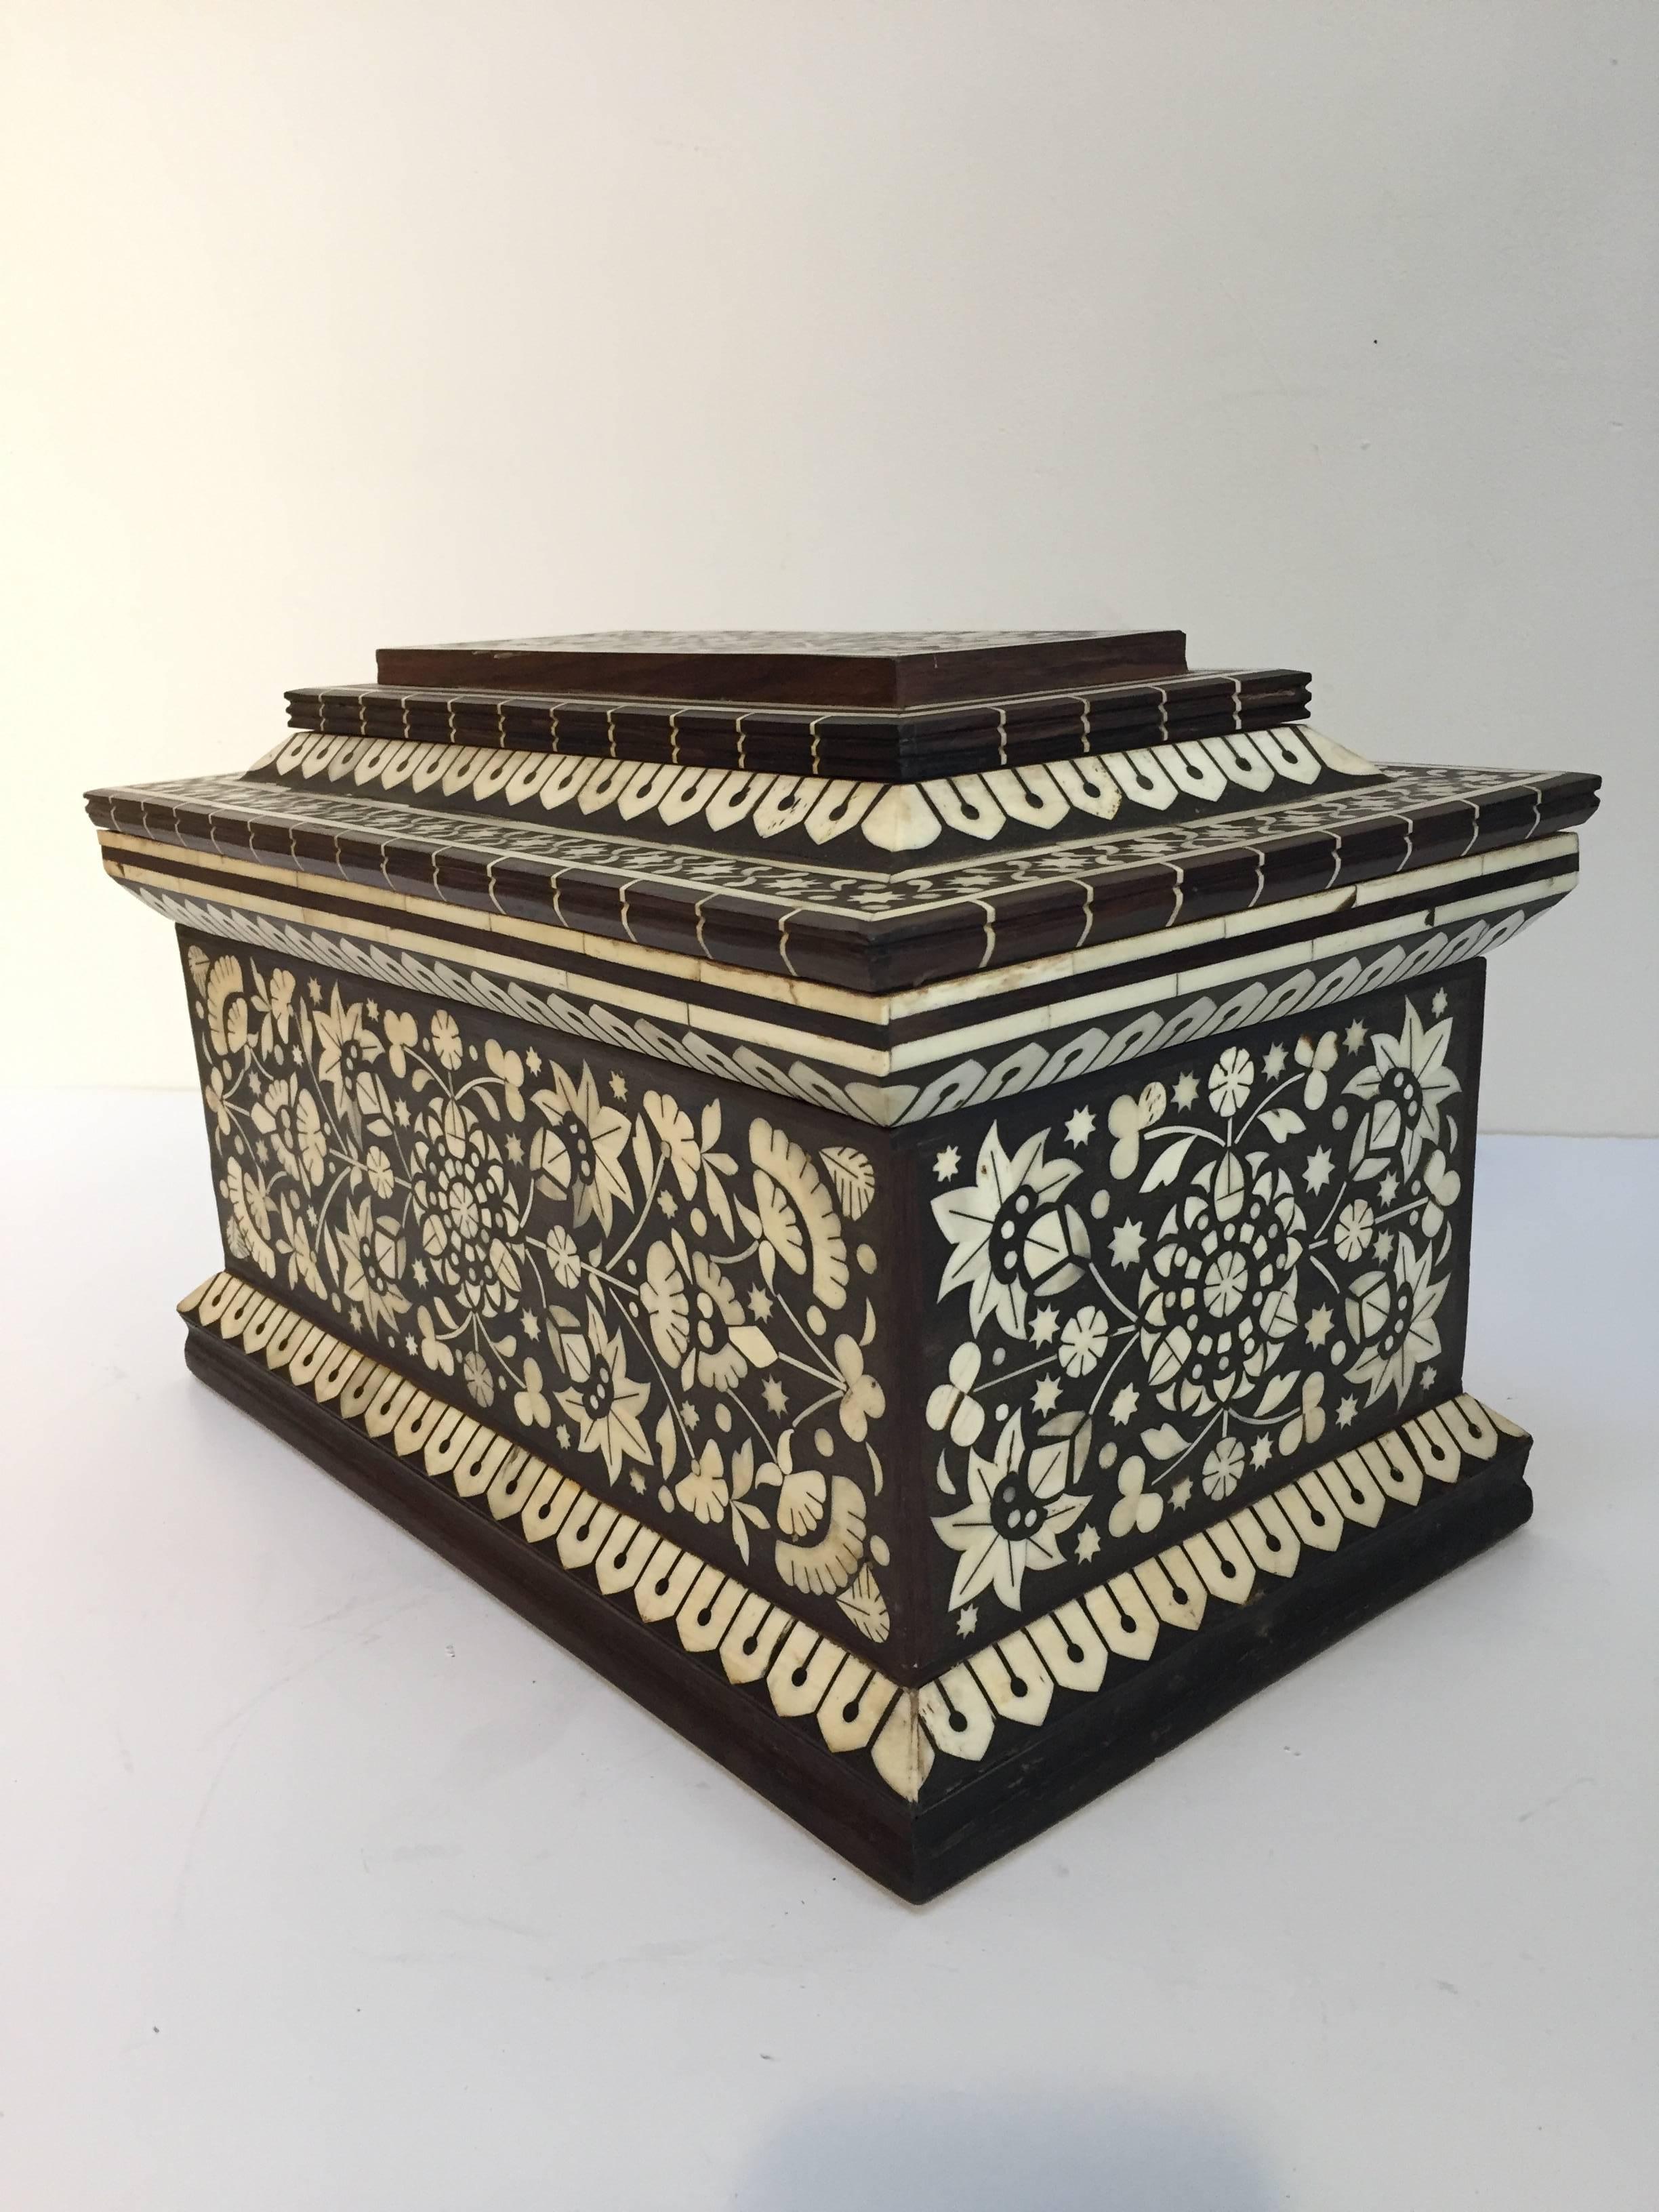 Fabulous Anglo-Indian decorative chest inlaid with bone.
Made in Vizagapatam, situated on the south east coast of India, near Madras
Sandalwood Horn Inlaid with vine flowers surround the top and base.
These exotic box pieces were crafted with